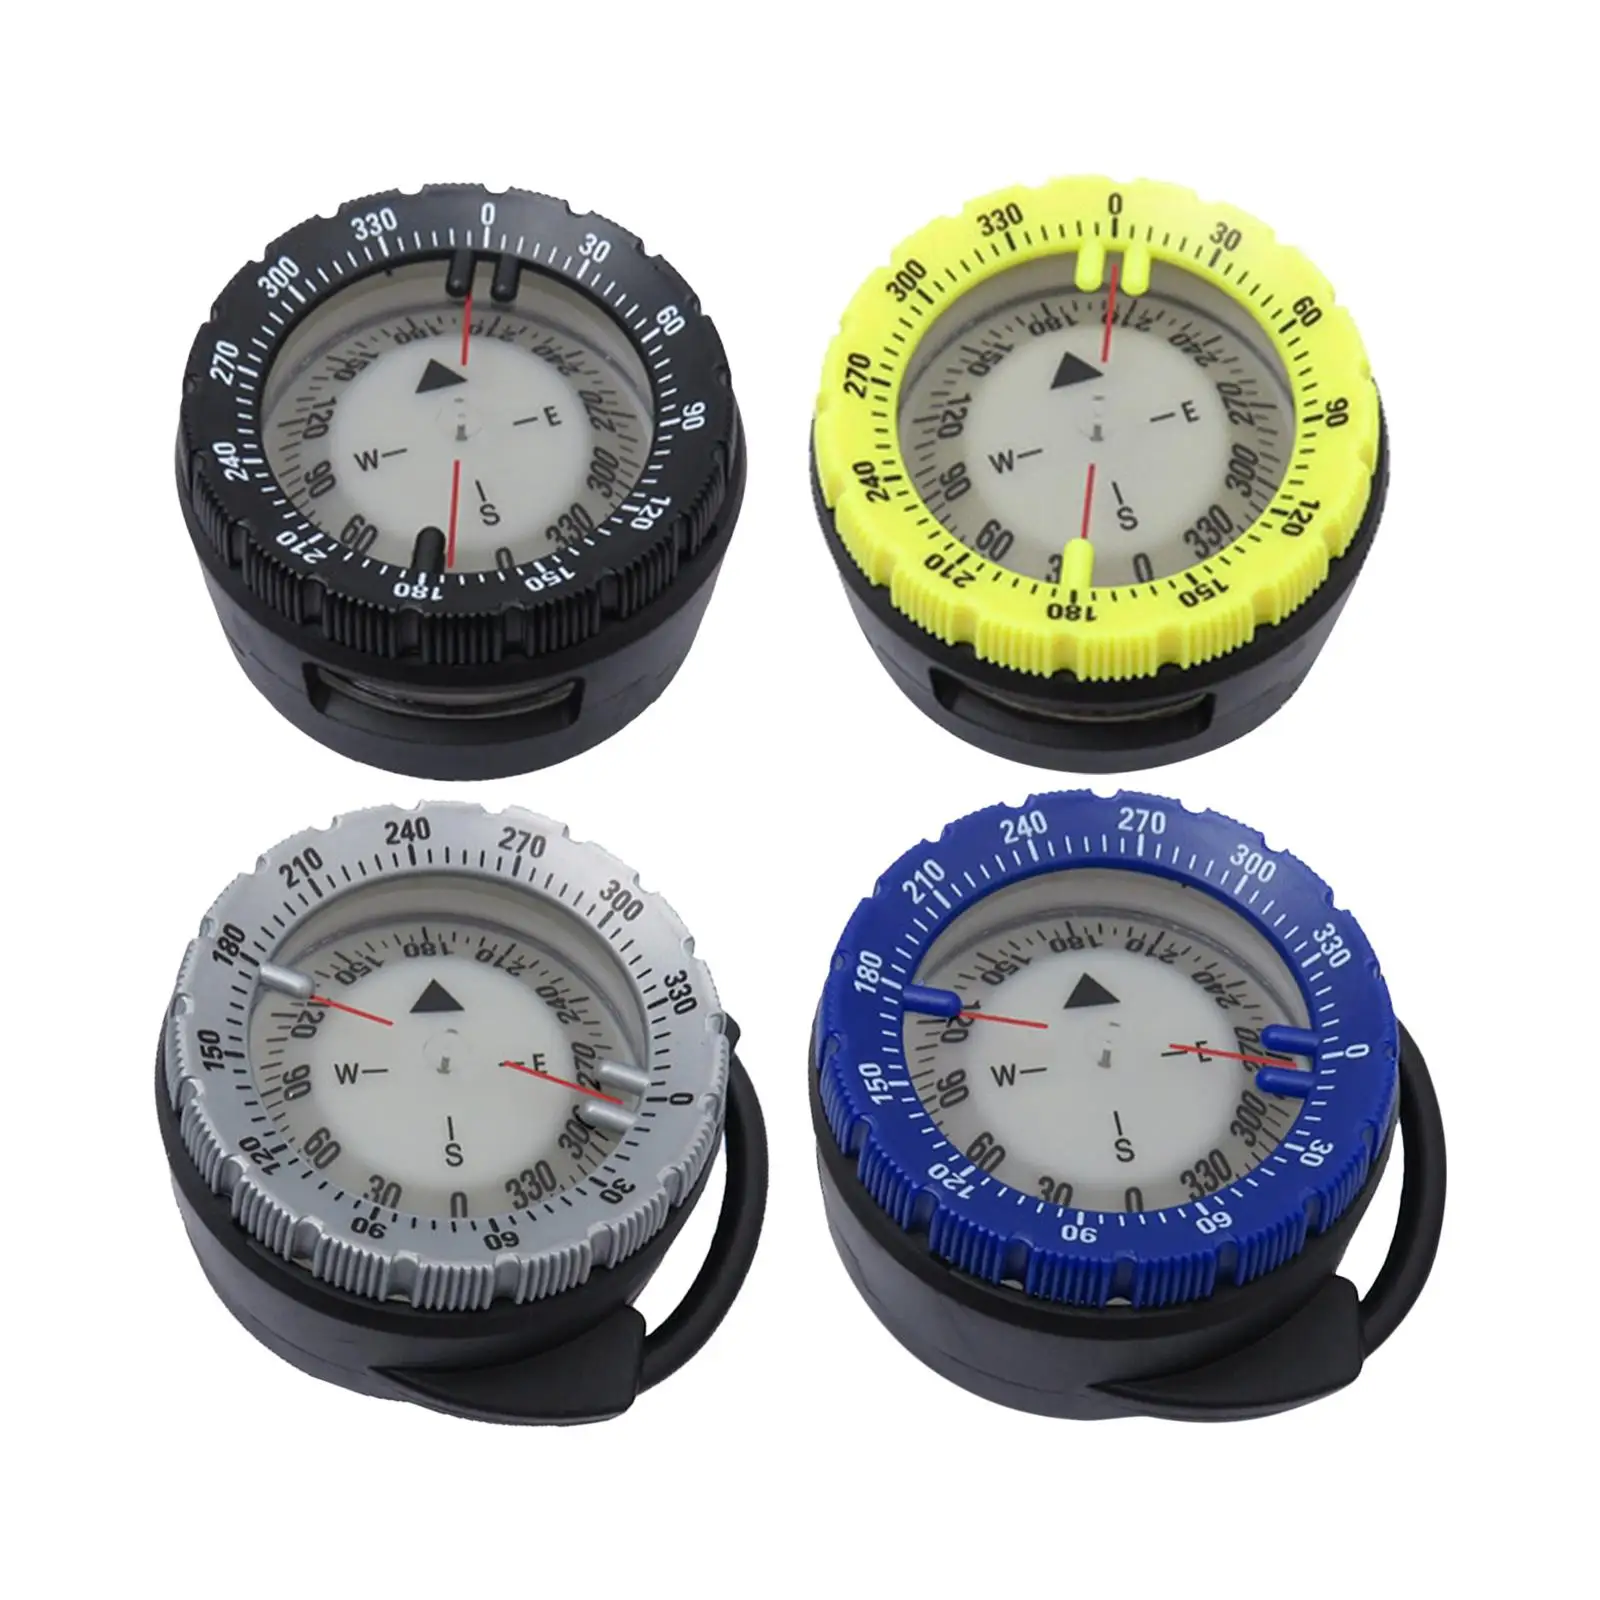 Camping Survival Compass Classic Pocket Compass Luminous Compass for Outdoor Climbing Backpacking Orienteering Camping